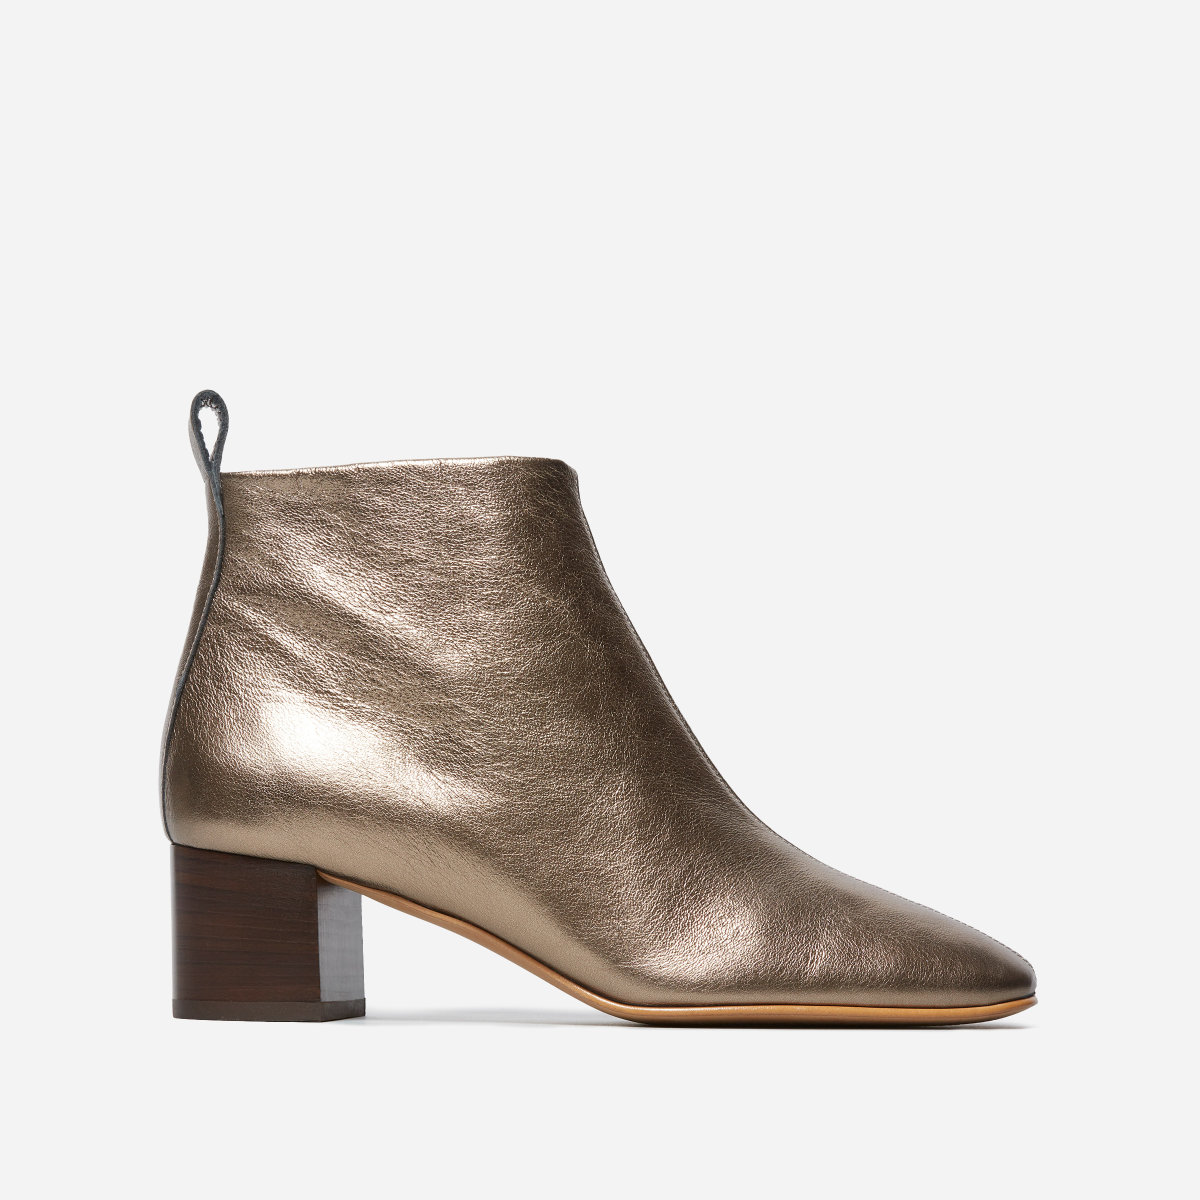 Everlane Day Boot ankle boot in bronze metallic. Details at une femme d'un certain age.